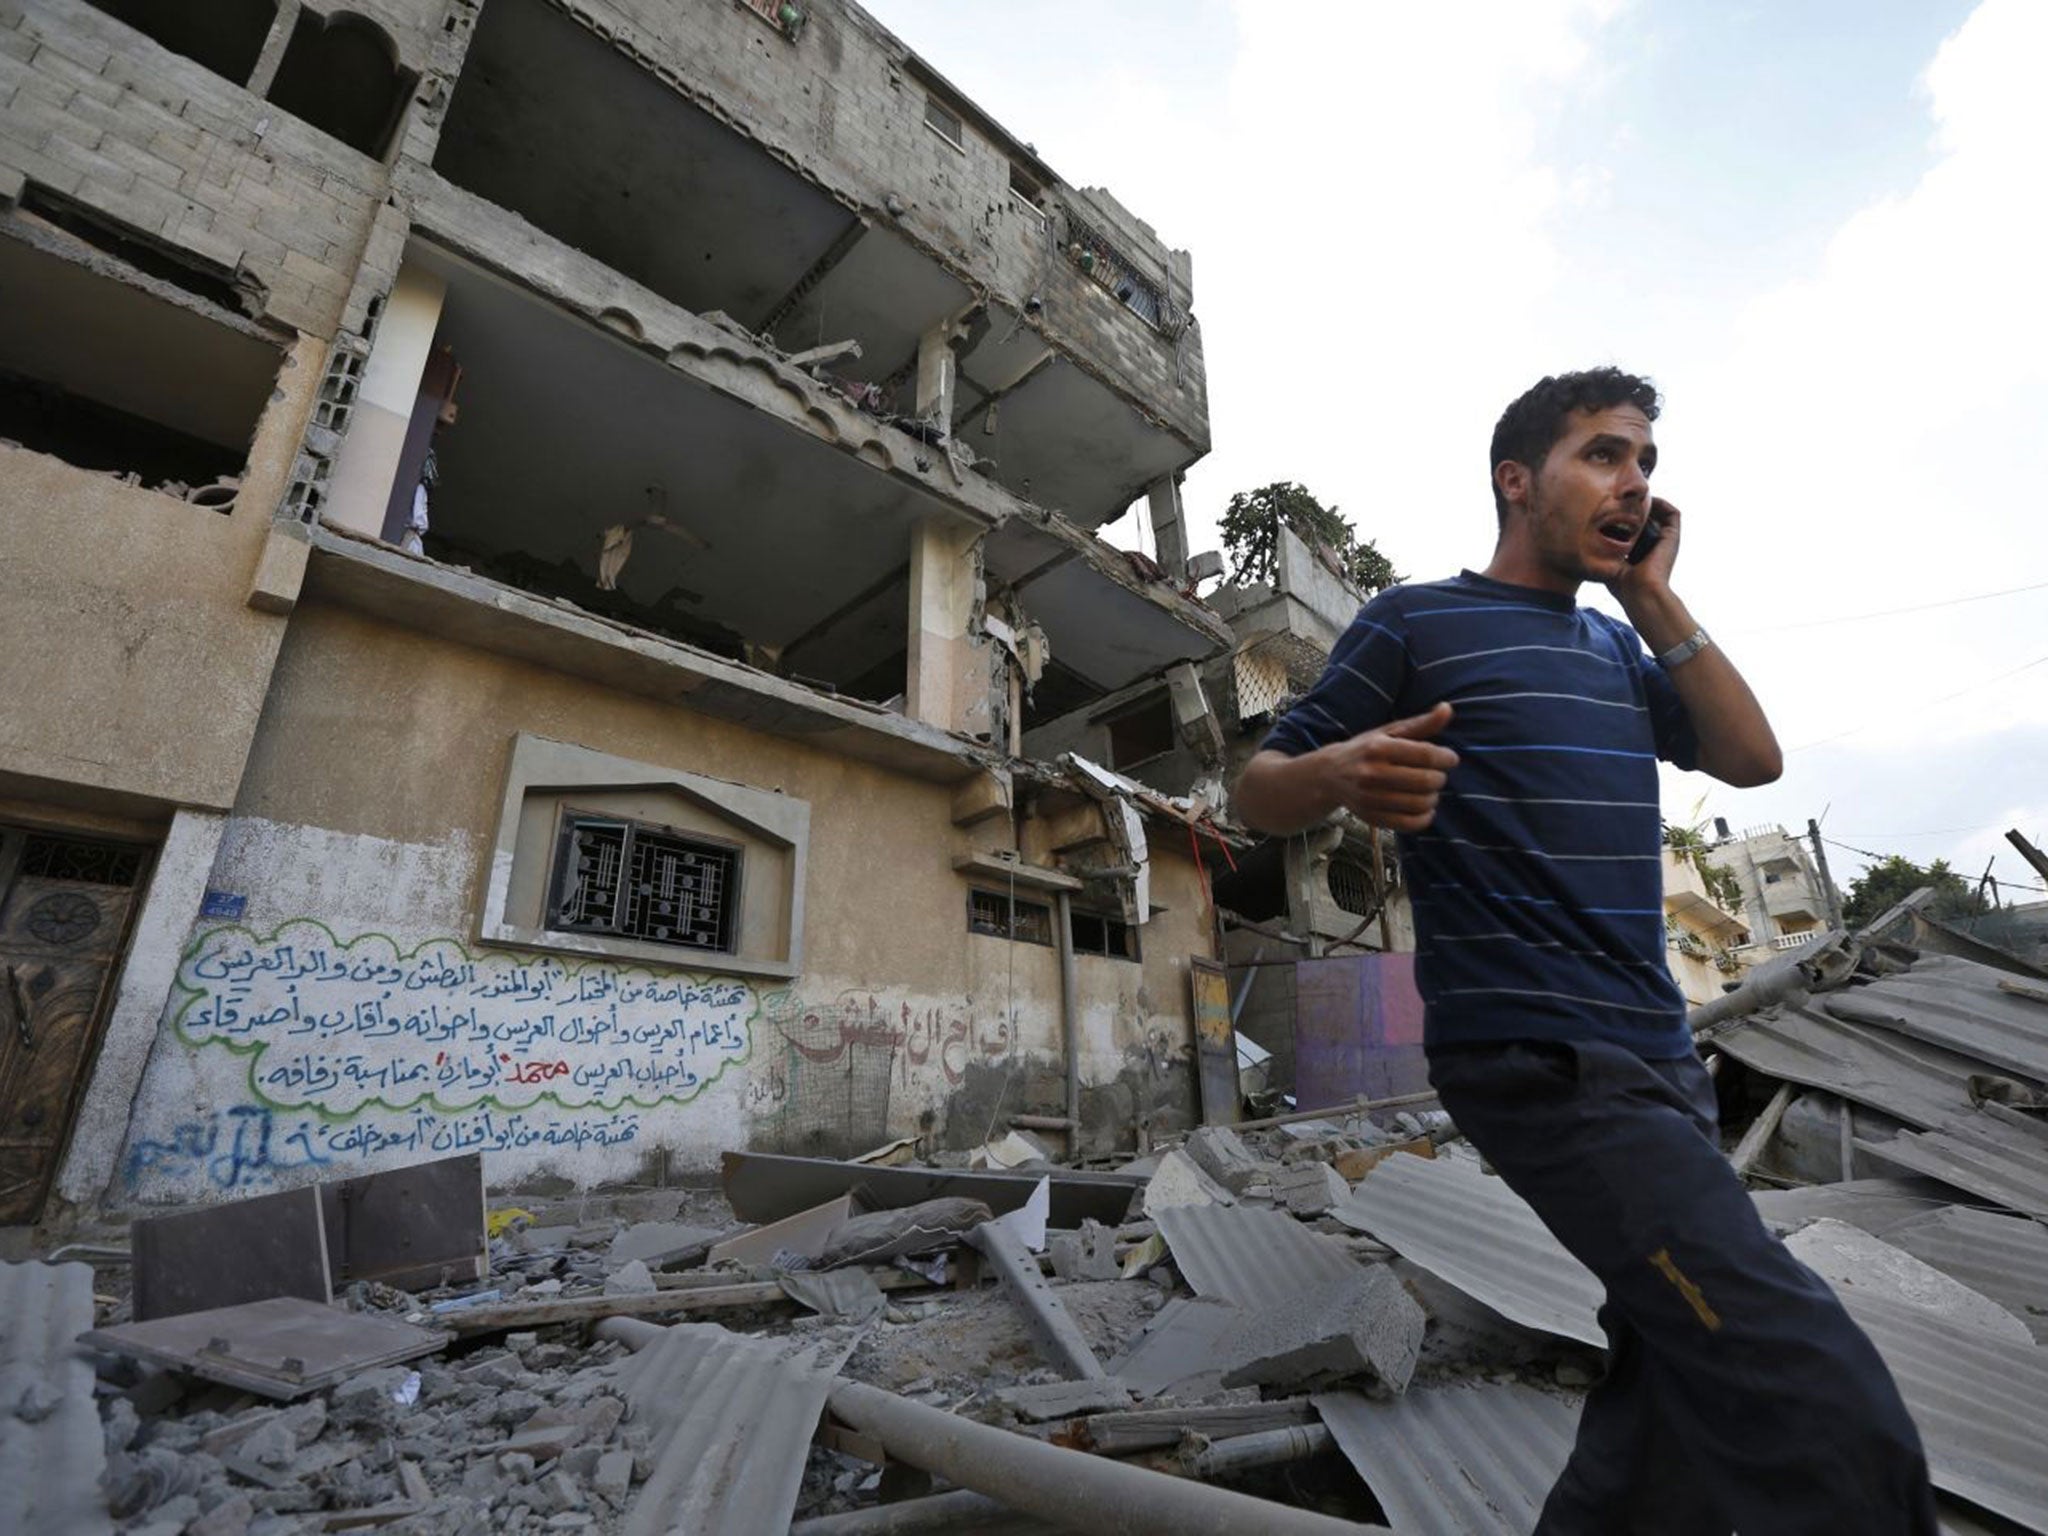 A Palestinian talks on a mobile phone as he walks on the rubble of a damaged house following an overnight Israeli missile strike in Gaza City, Tuesday, July 15, 2014